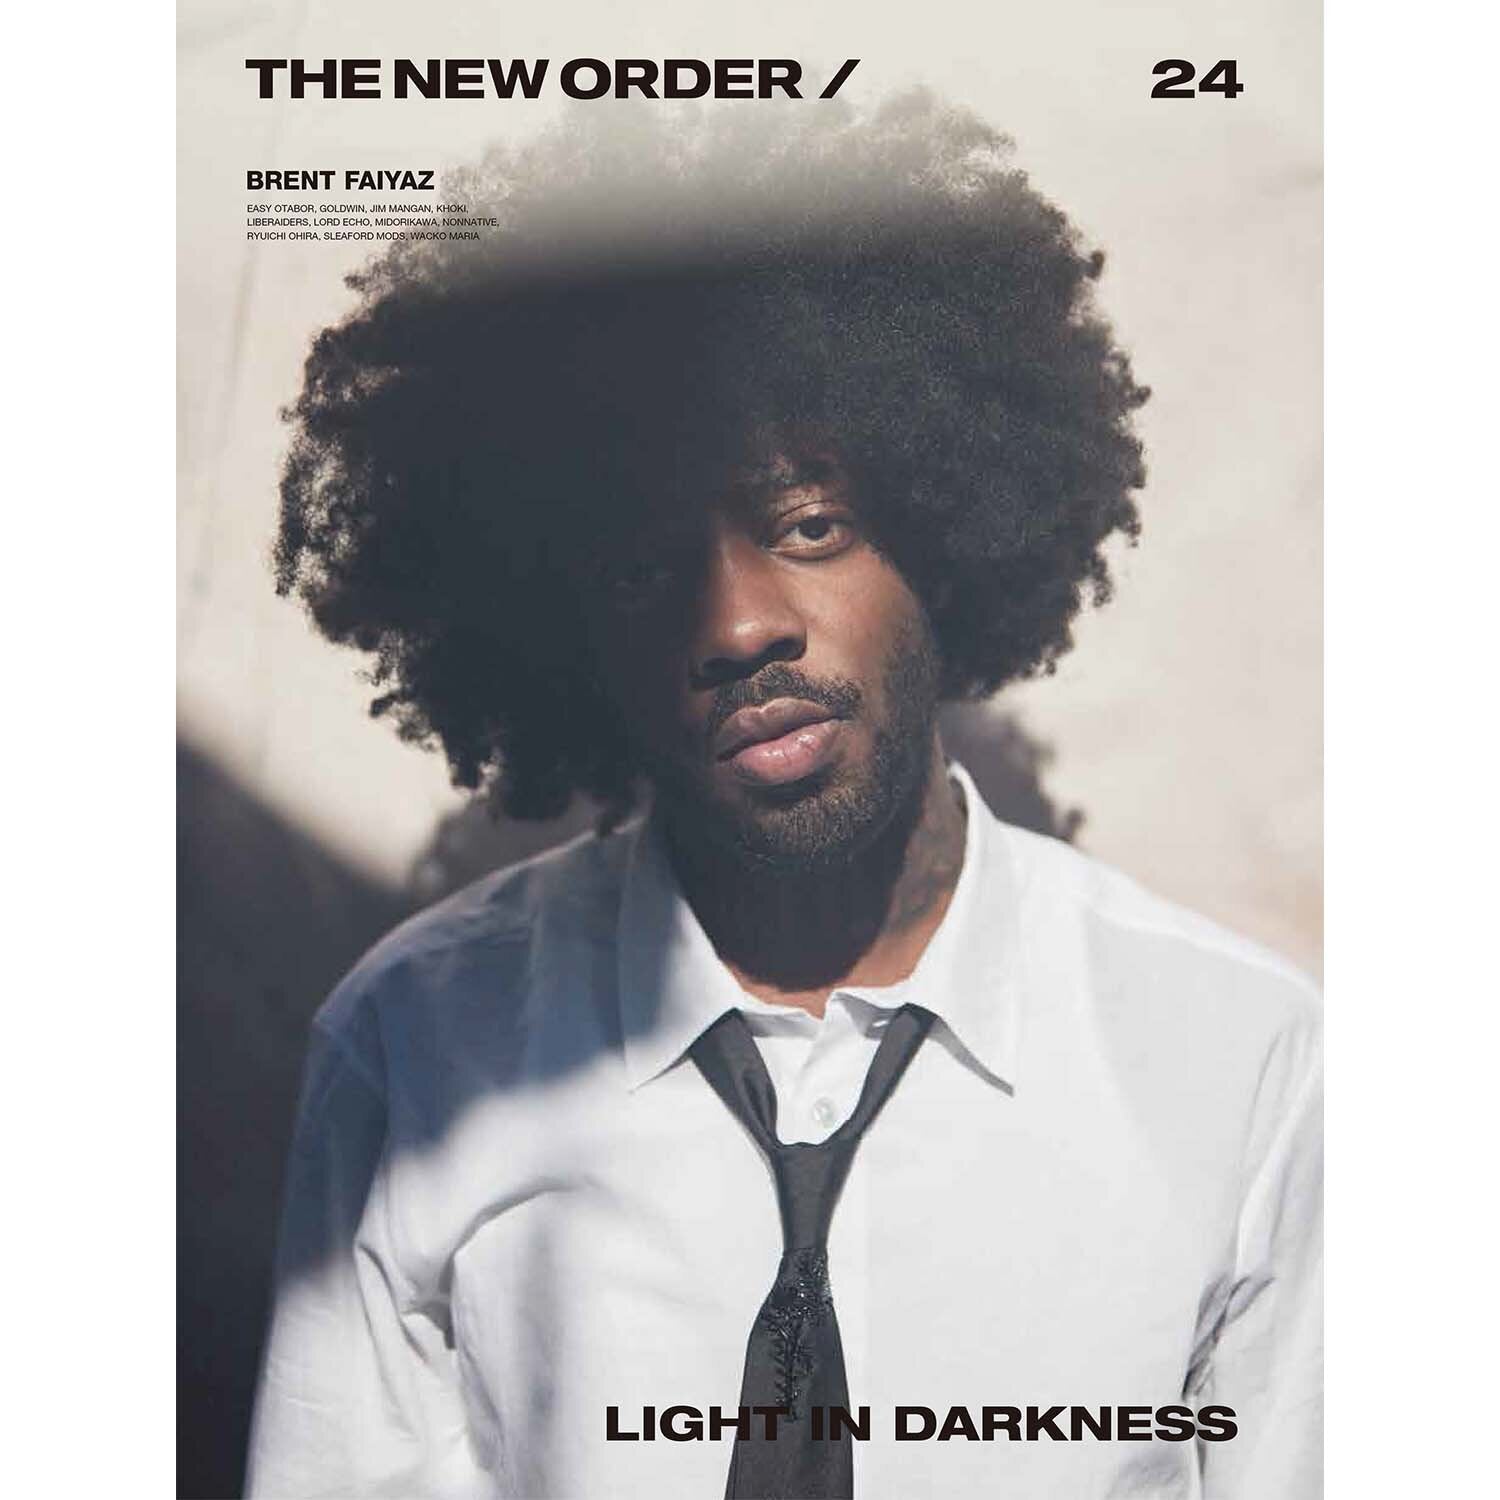 THE NEW ORDER ISSUE 24